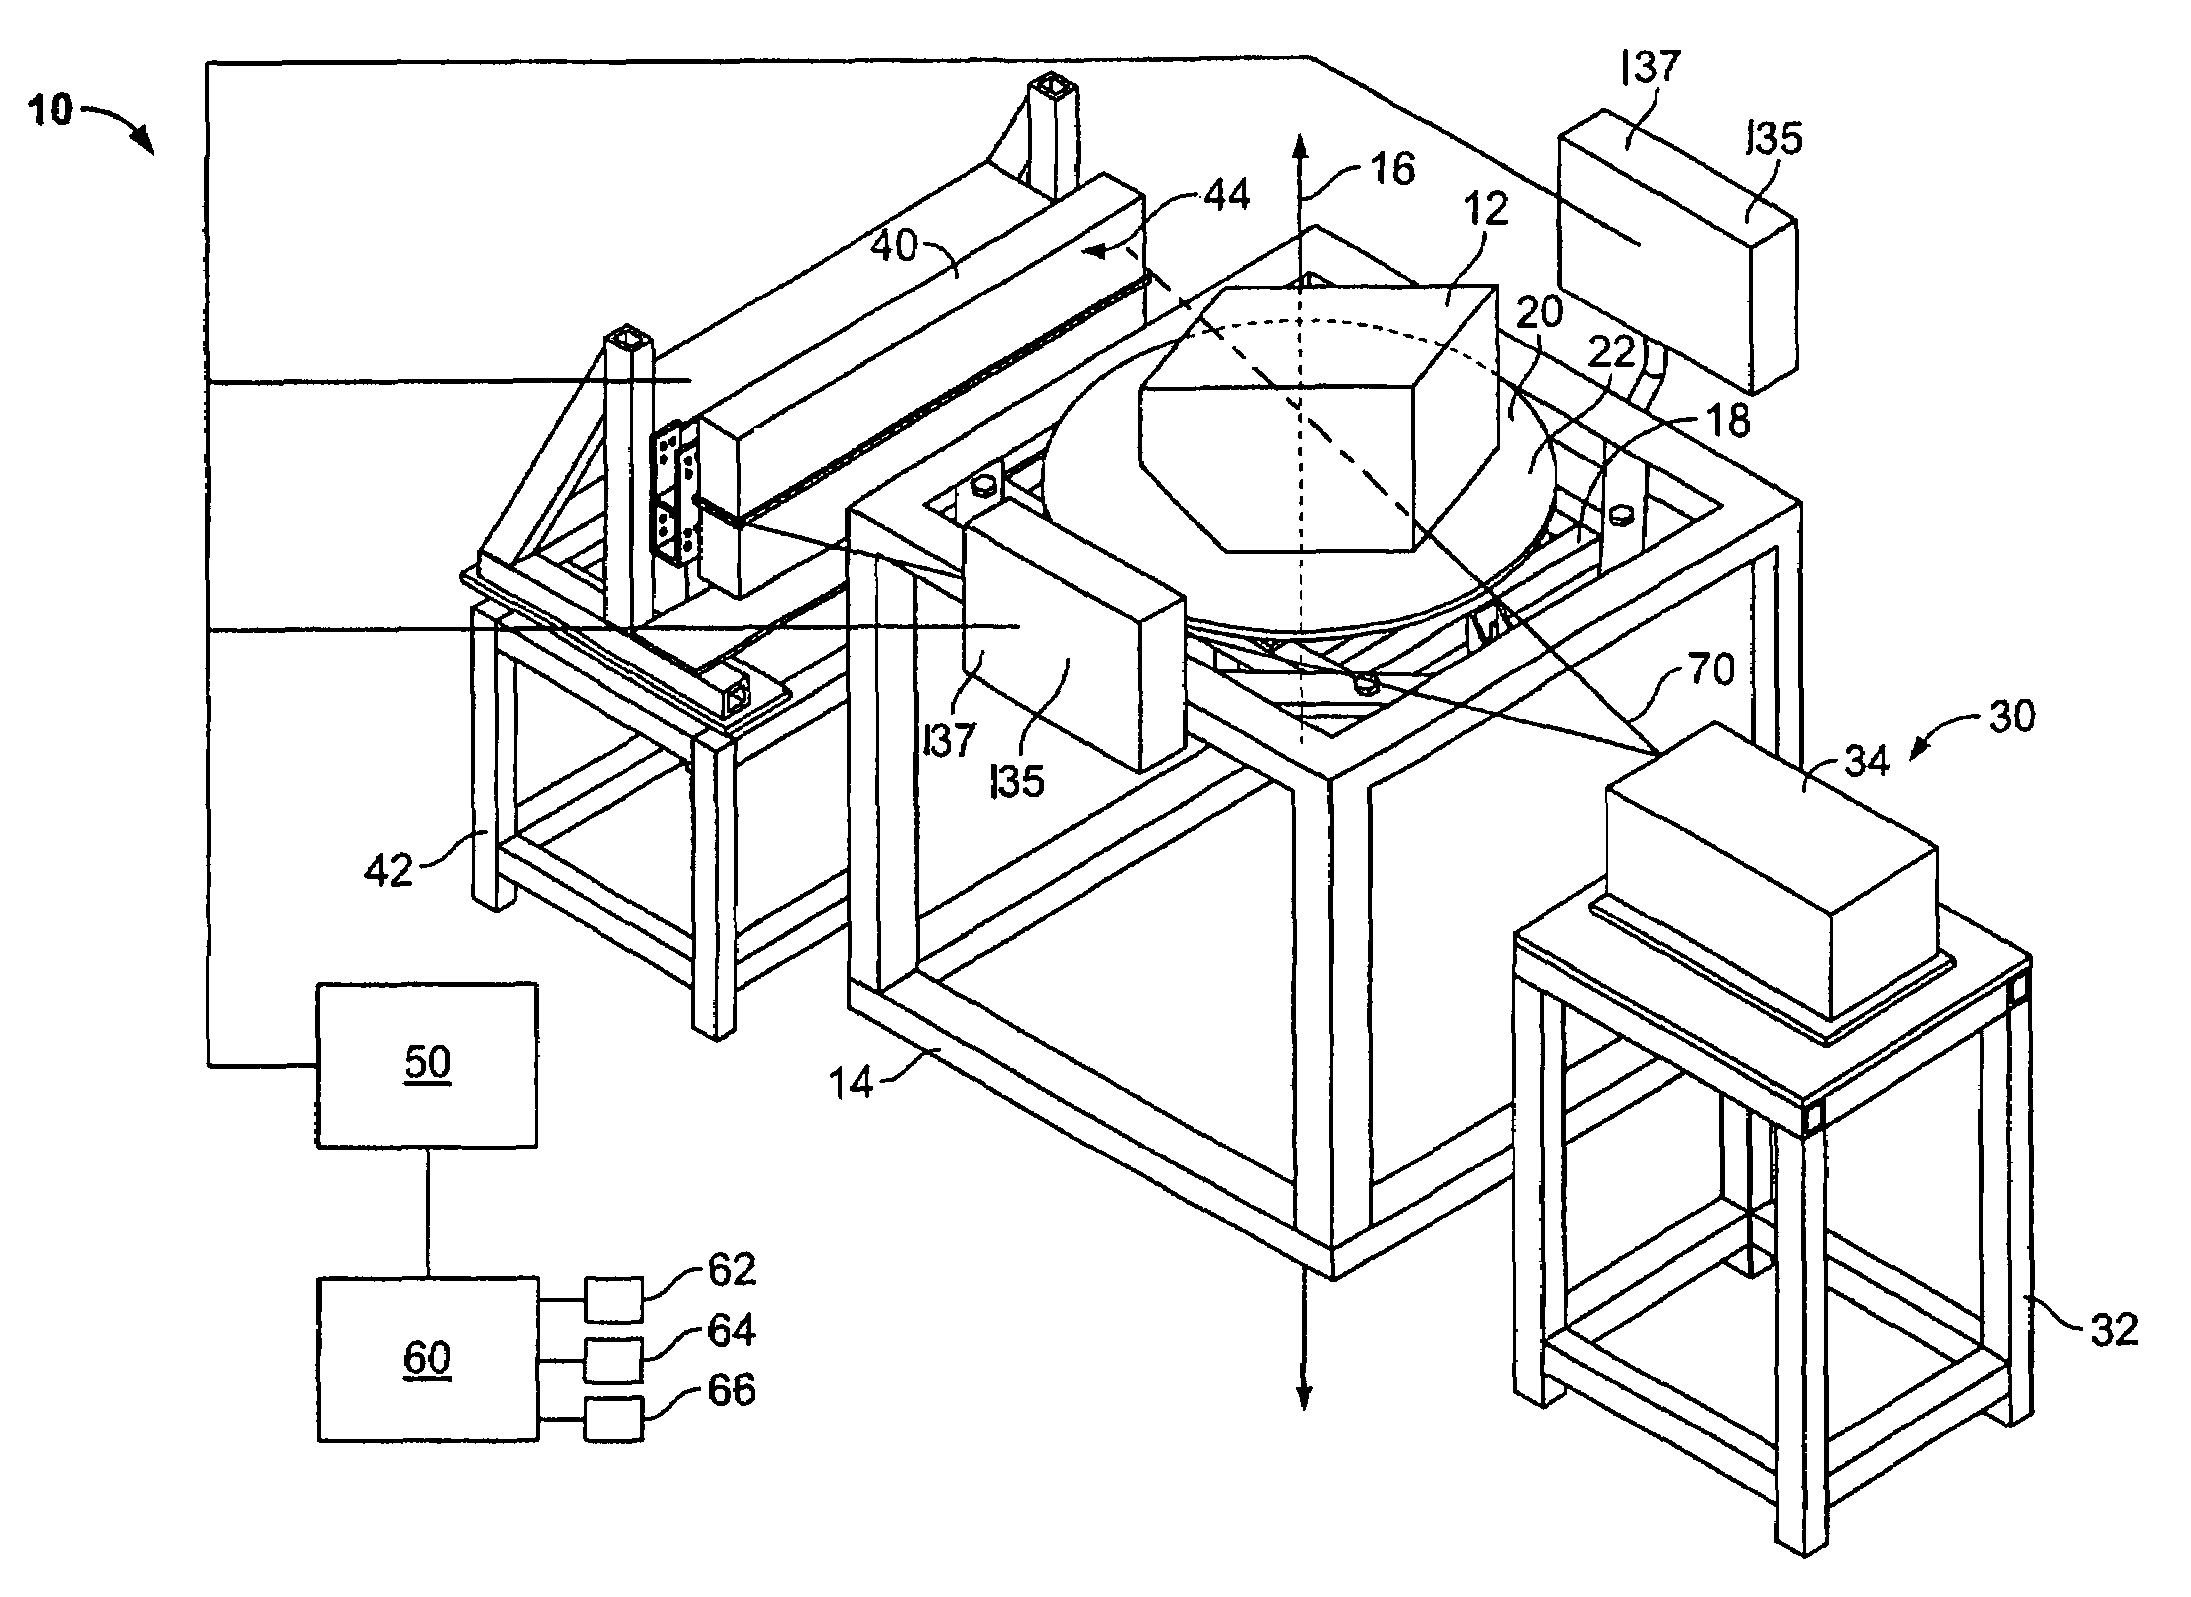 Computed tomography cargo inspection system and method